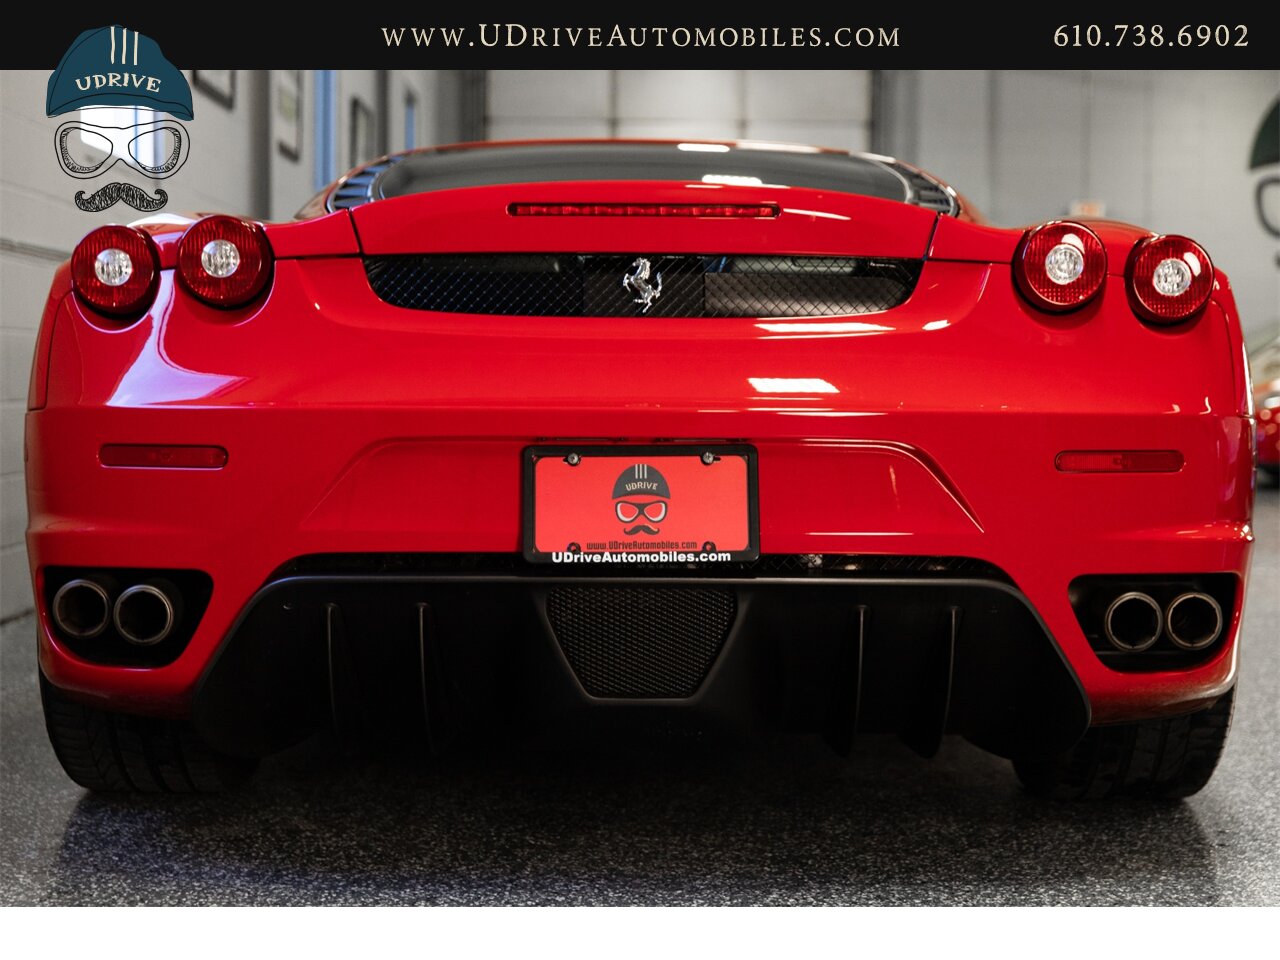 2006 Ferrari F430 F1 Coupe 1 Owner Daytona Seats Challenge Whls  Carbon Fibre Upper Lower Zone Shields Piping Serv Hist $208k MSRP - Photo 18 - West Chester, PA 19382